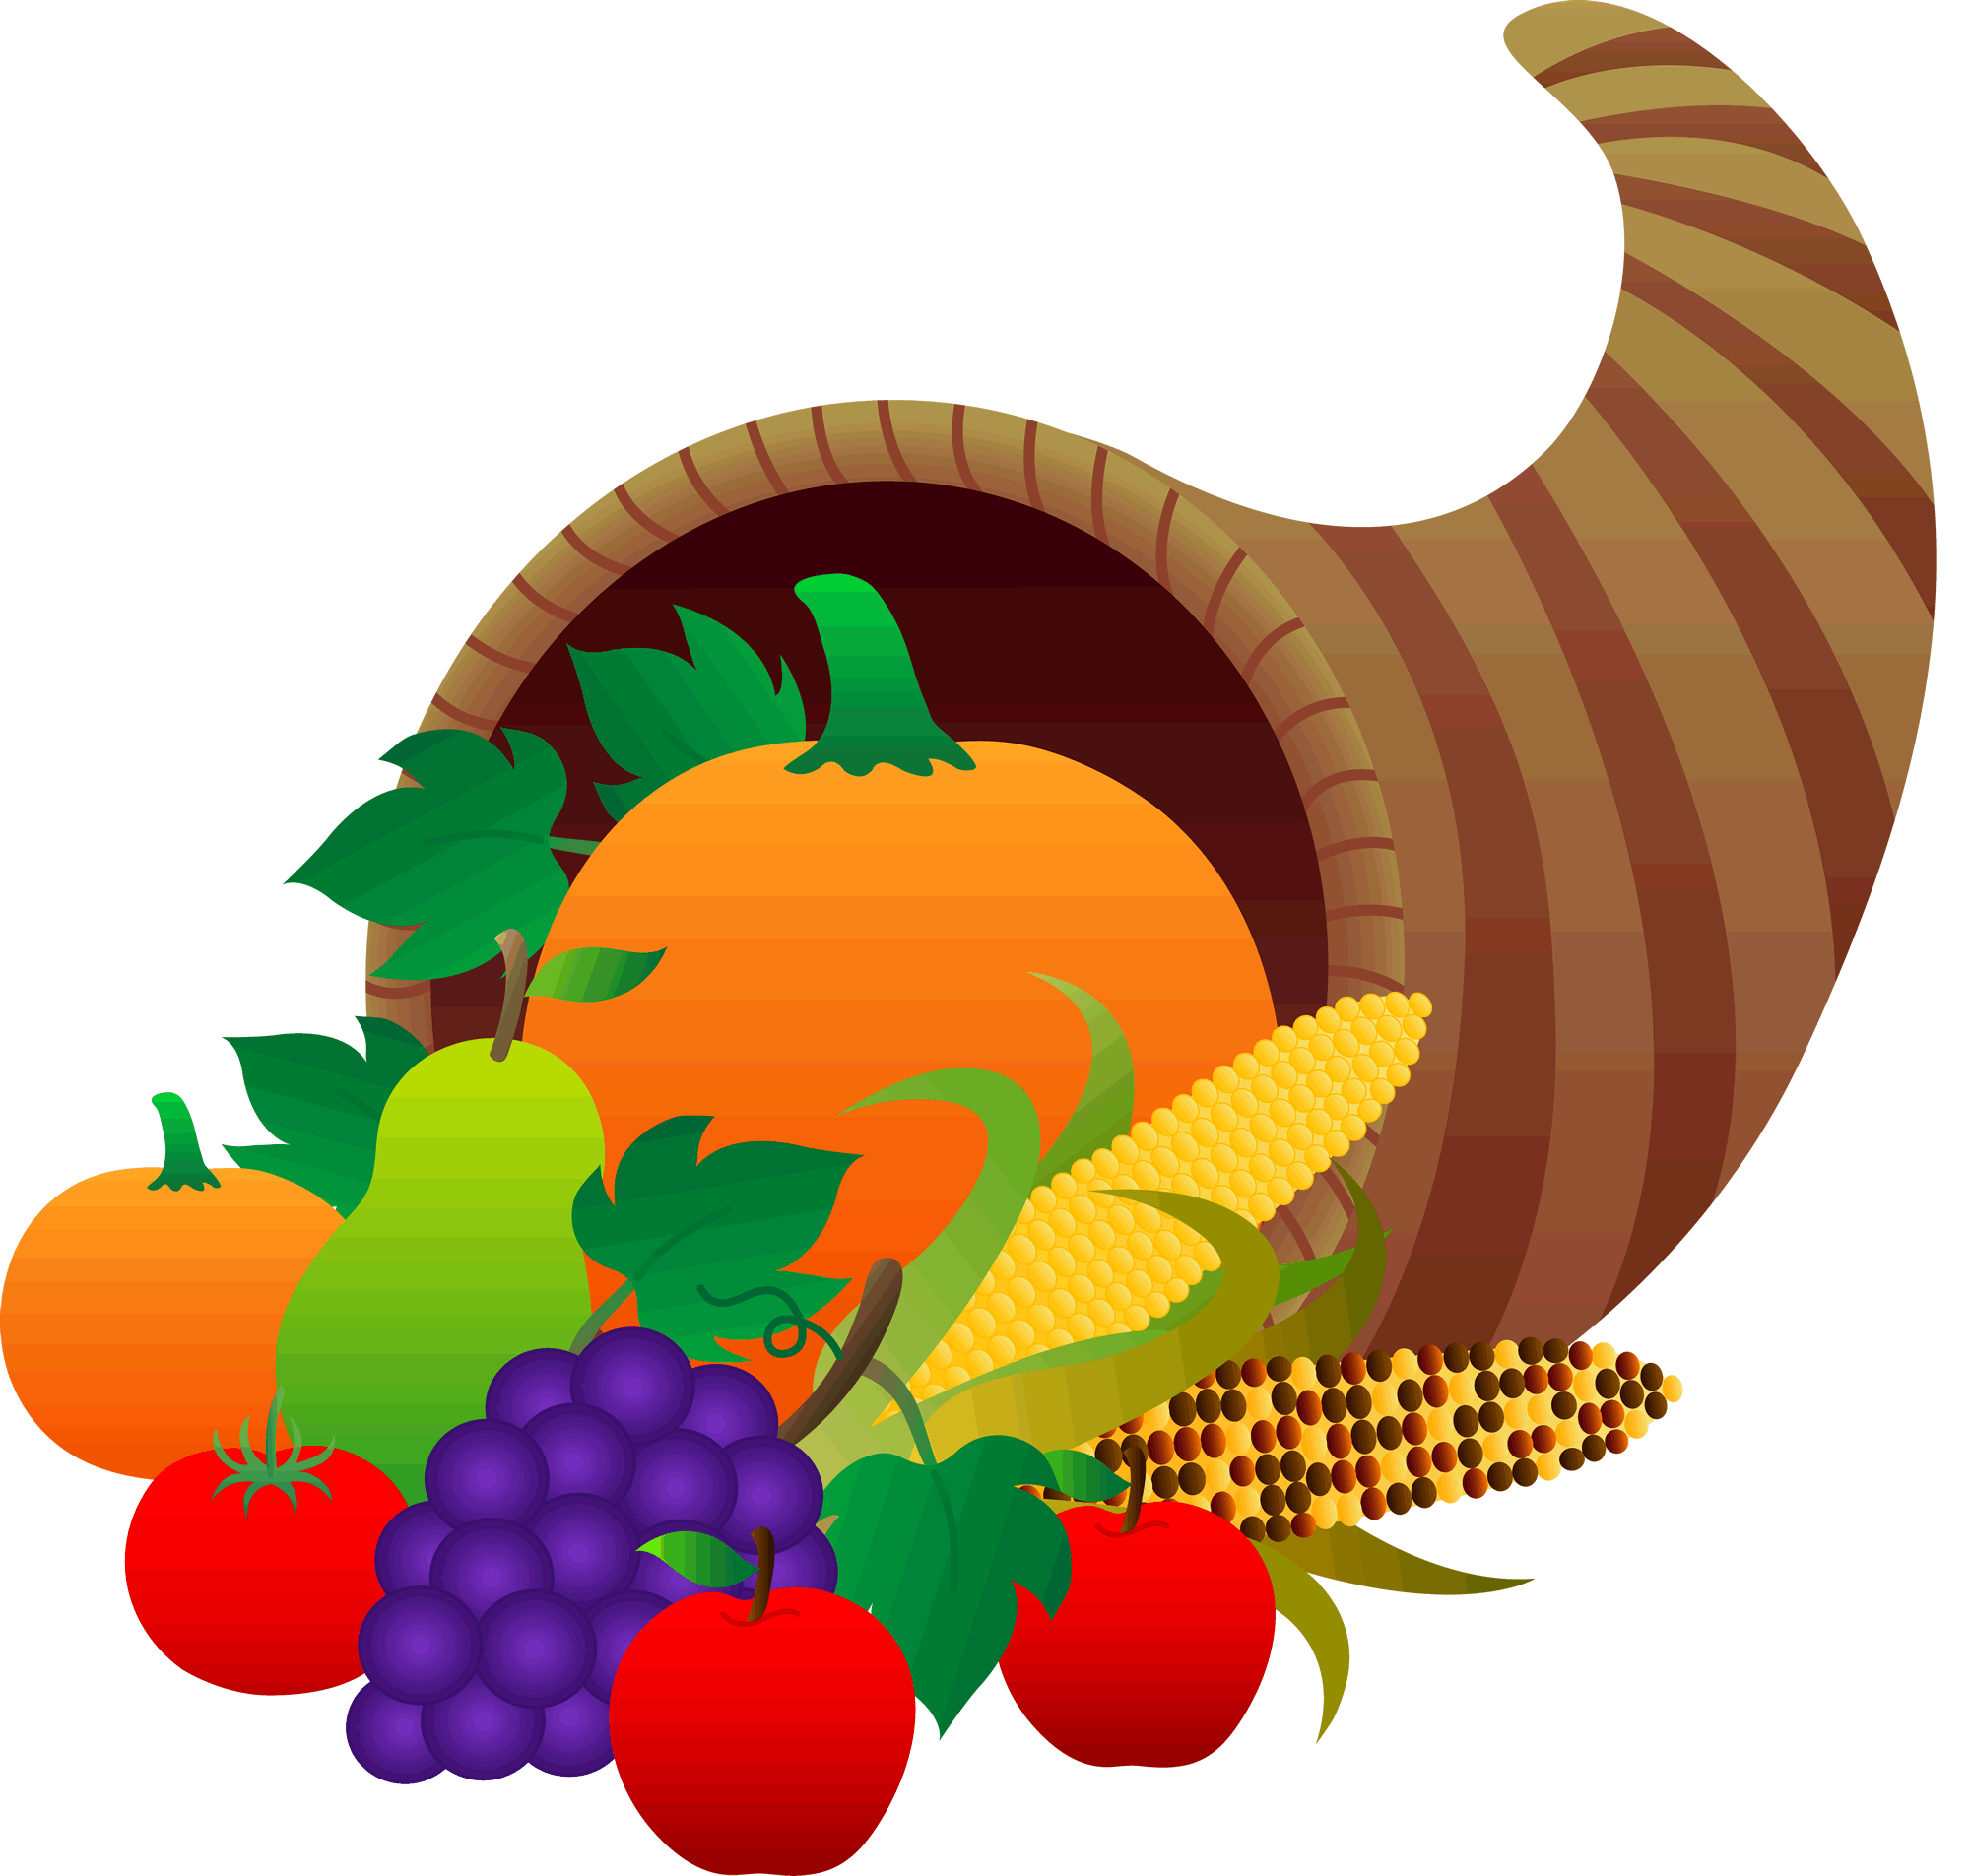 Special Moments: Chef Thanksgiving Clipart, thanksgiving quotes 